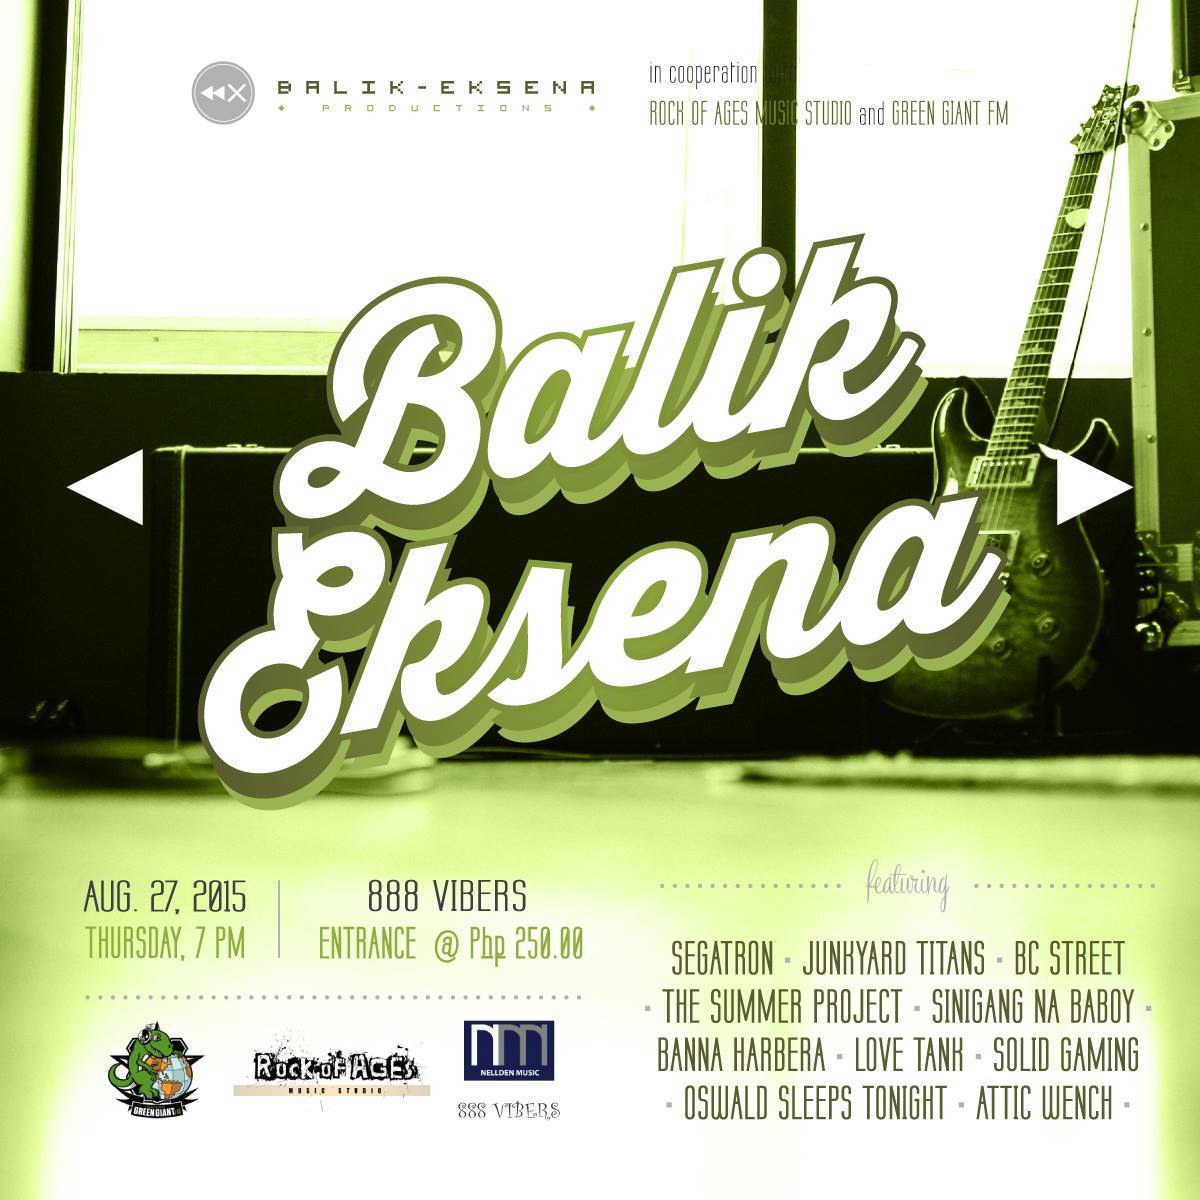 BALIK EKSENA     Thursday, August 27     at 7:00pm     	     Show Map     888 Vibers Bar & Resto     Leveriza Street, Pasay City, Philippines Balik Eksena Productions in cooperation with Rock Of Ages Music Studio and Green Giant FM presents BALIK EKSENA!!! An event that everyone cannot afford to miss! An assembly of some of the best acts from Taft featuring: SEGATRON JUNKYARD TITANS (formerly Jack N Poy) THE SUMMER PROJECT SINIGANG NA BABOY BANNA HARBERA LOVE TANK SOLID GAMING BC STREET ATTIC WENCH and OSWALD SLEEPS TONIGHT Chill vibes, good music, and unforgettable performances; we promise to give you the best musicians Animo has to offer. If you're looking for a new way to spend your happy thursday, this is it! Wag ka nang maghanap ng iba, mahihilo ka lang; SA BALIK EKSENA KA NA!!! Gates open at 7pm. For tickets and inquiries please contact Ulysses Villena at 09276226474